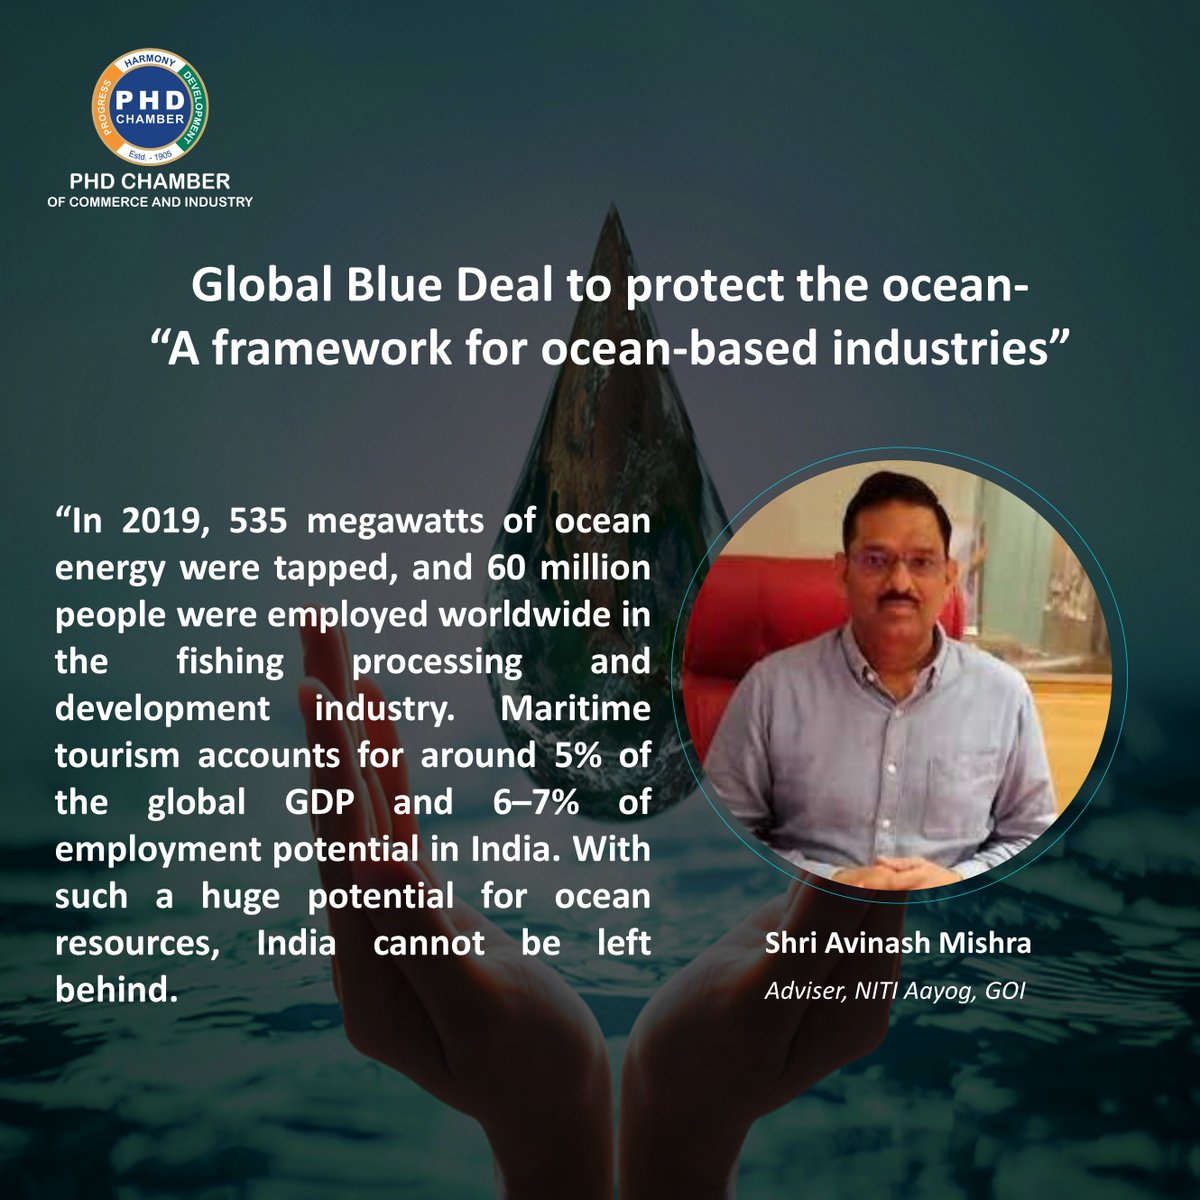 Shri Avinash Mishra, Adviser, NITI Aayog, GOI, offered his take at the conference on Global Blue Deal to protect the ocean- “A framework for ocean-based industries,” held today at PHD House, New Delhi.

#PHDCCI #GlobalBlueDeal #protecttheocean